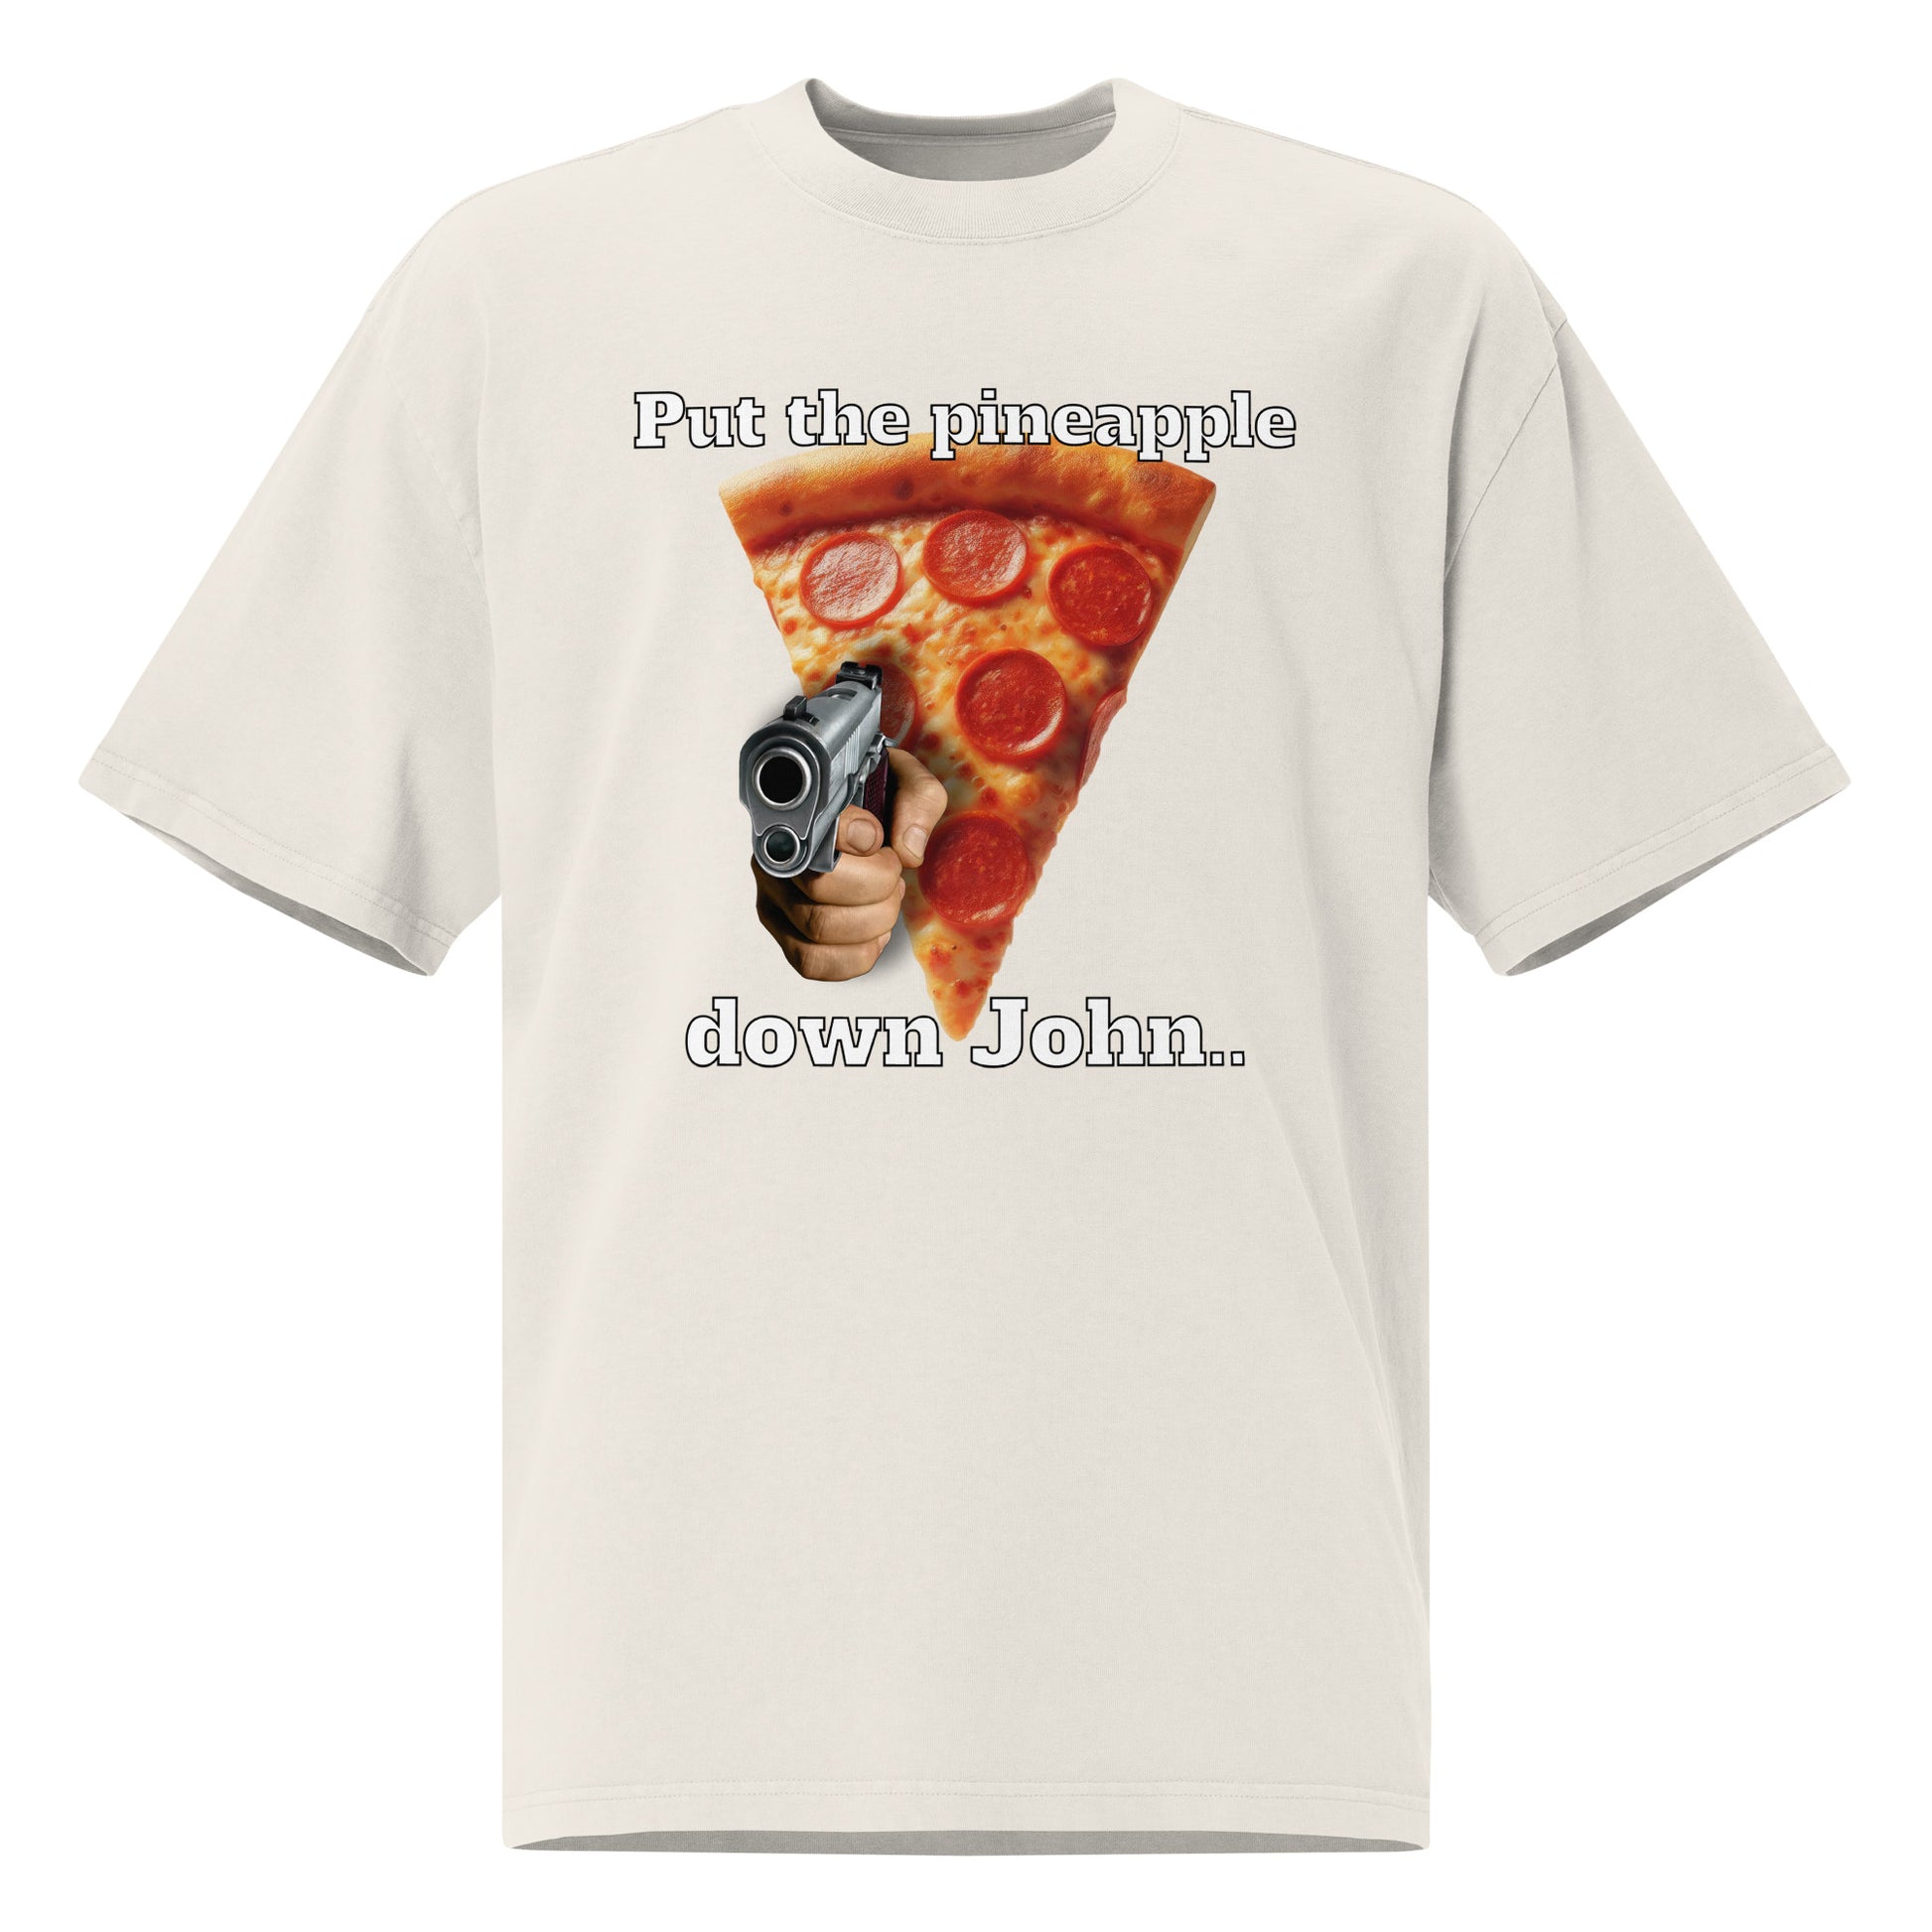 "Put the Pineapple Down John.." Premium Oversized faded t-shirt - Tower Pizza Gift Shop